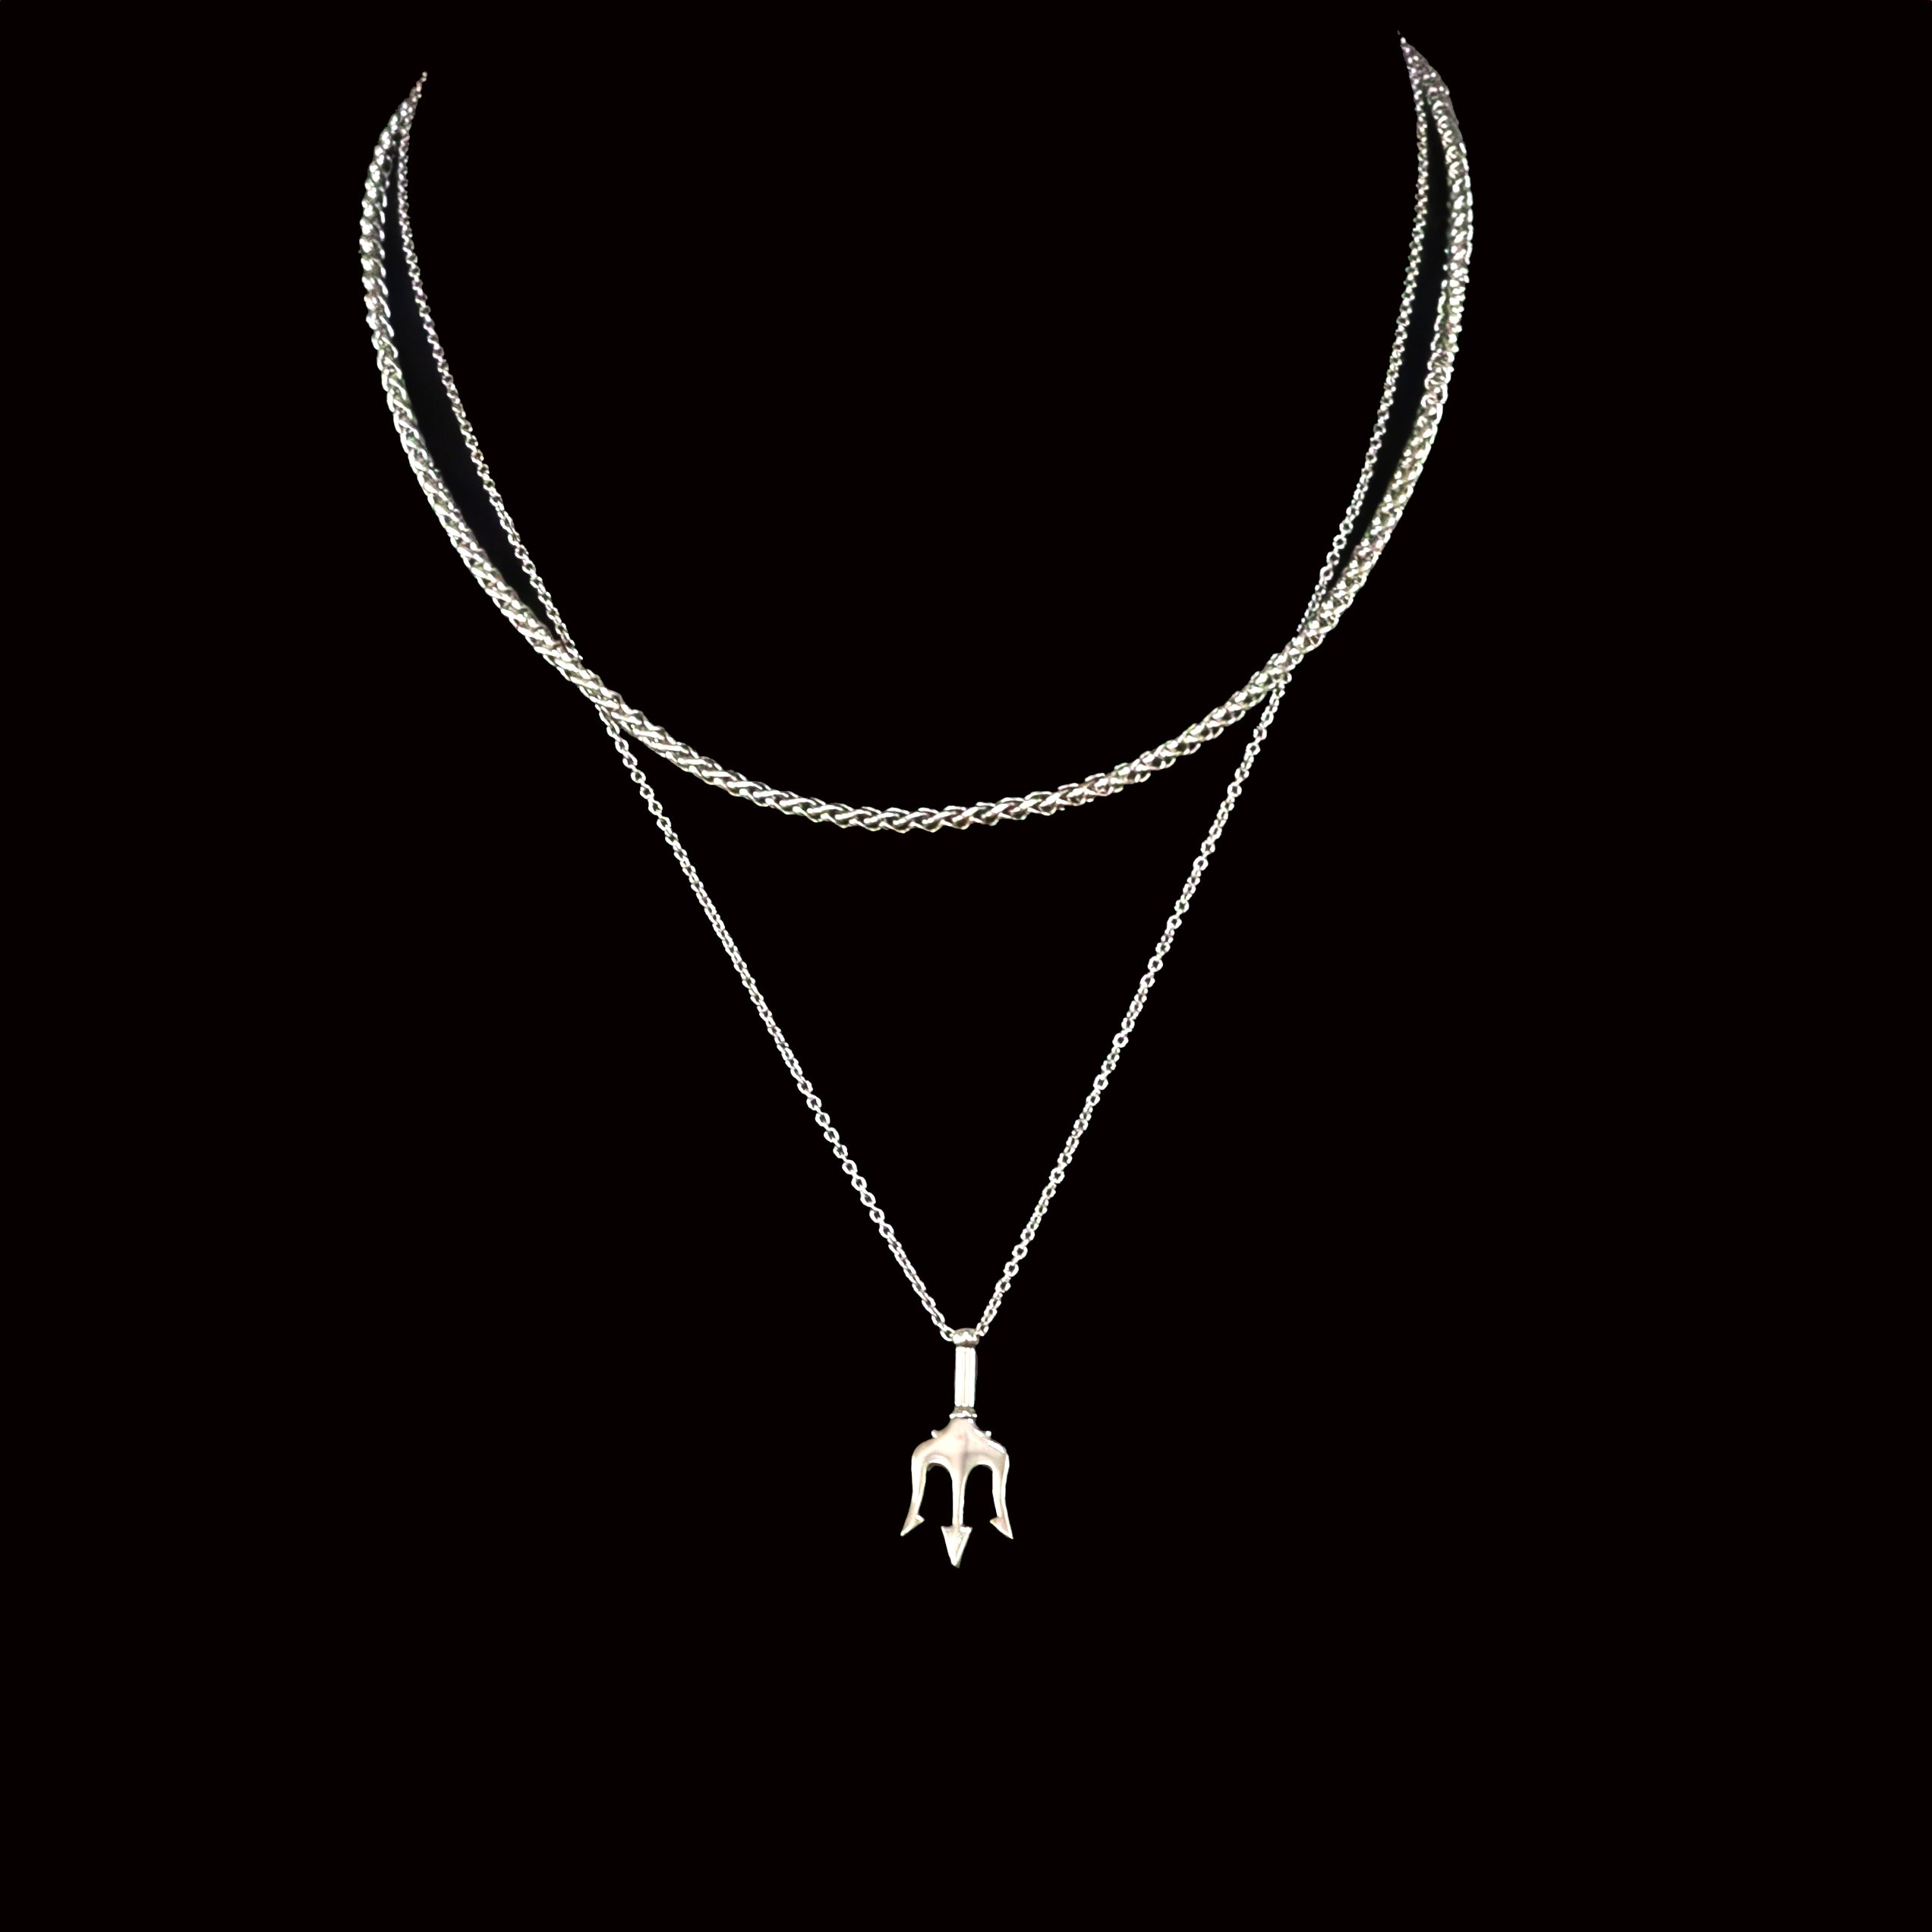 Kaysen Stainless Steel Trident Pendant & Rope Chain Necklace Set